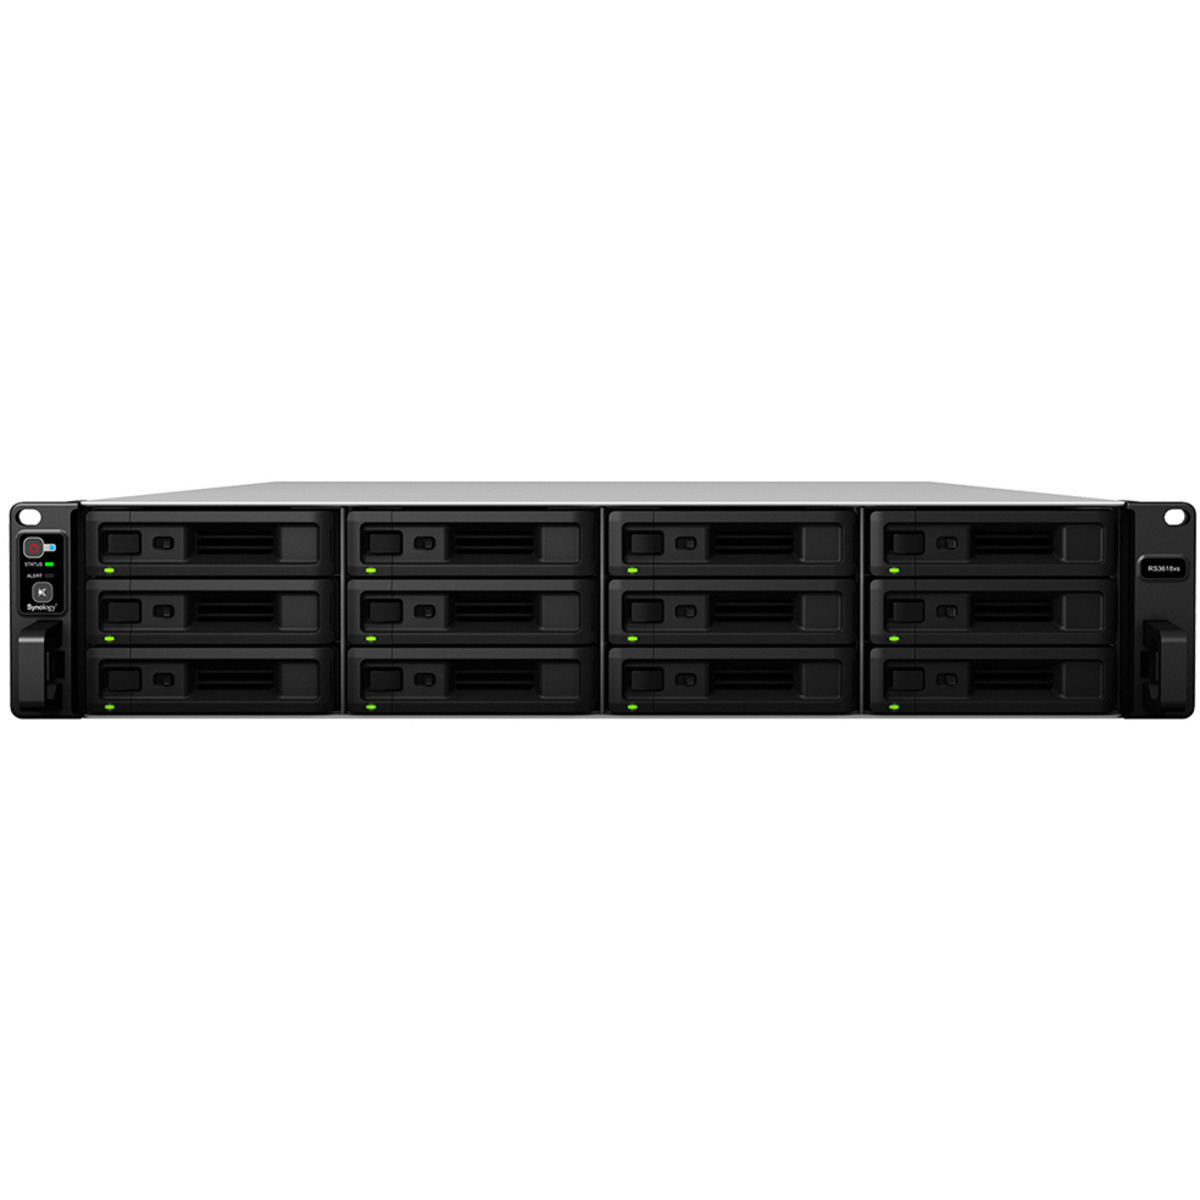 Synology RackStation RS3618xs 42tb 12-Bay RackMount Large Business / Enterprise NAS - Network Attached Storage Device 7x6tb Seagate BarraCuda ST6000DM003 3.5 5400rpm SATA 6Gb/s HDD CONSUMER Class Drives Installed - Burn-In Tested RackStation RS3618xs